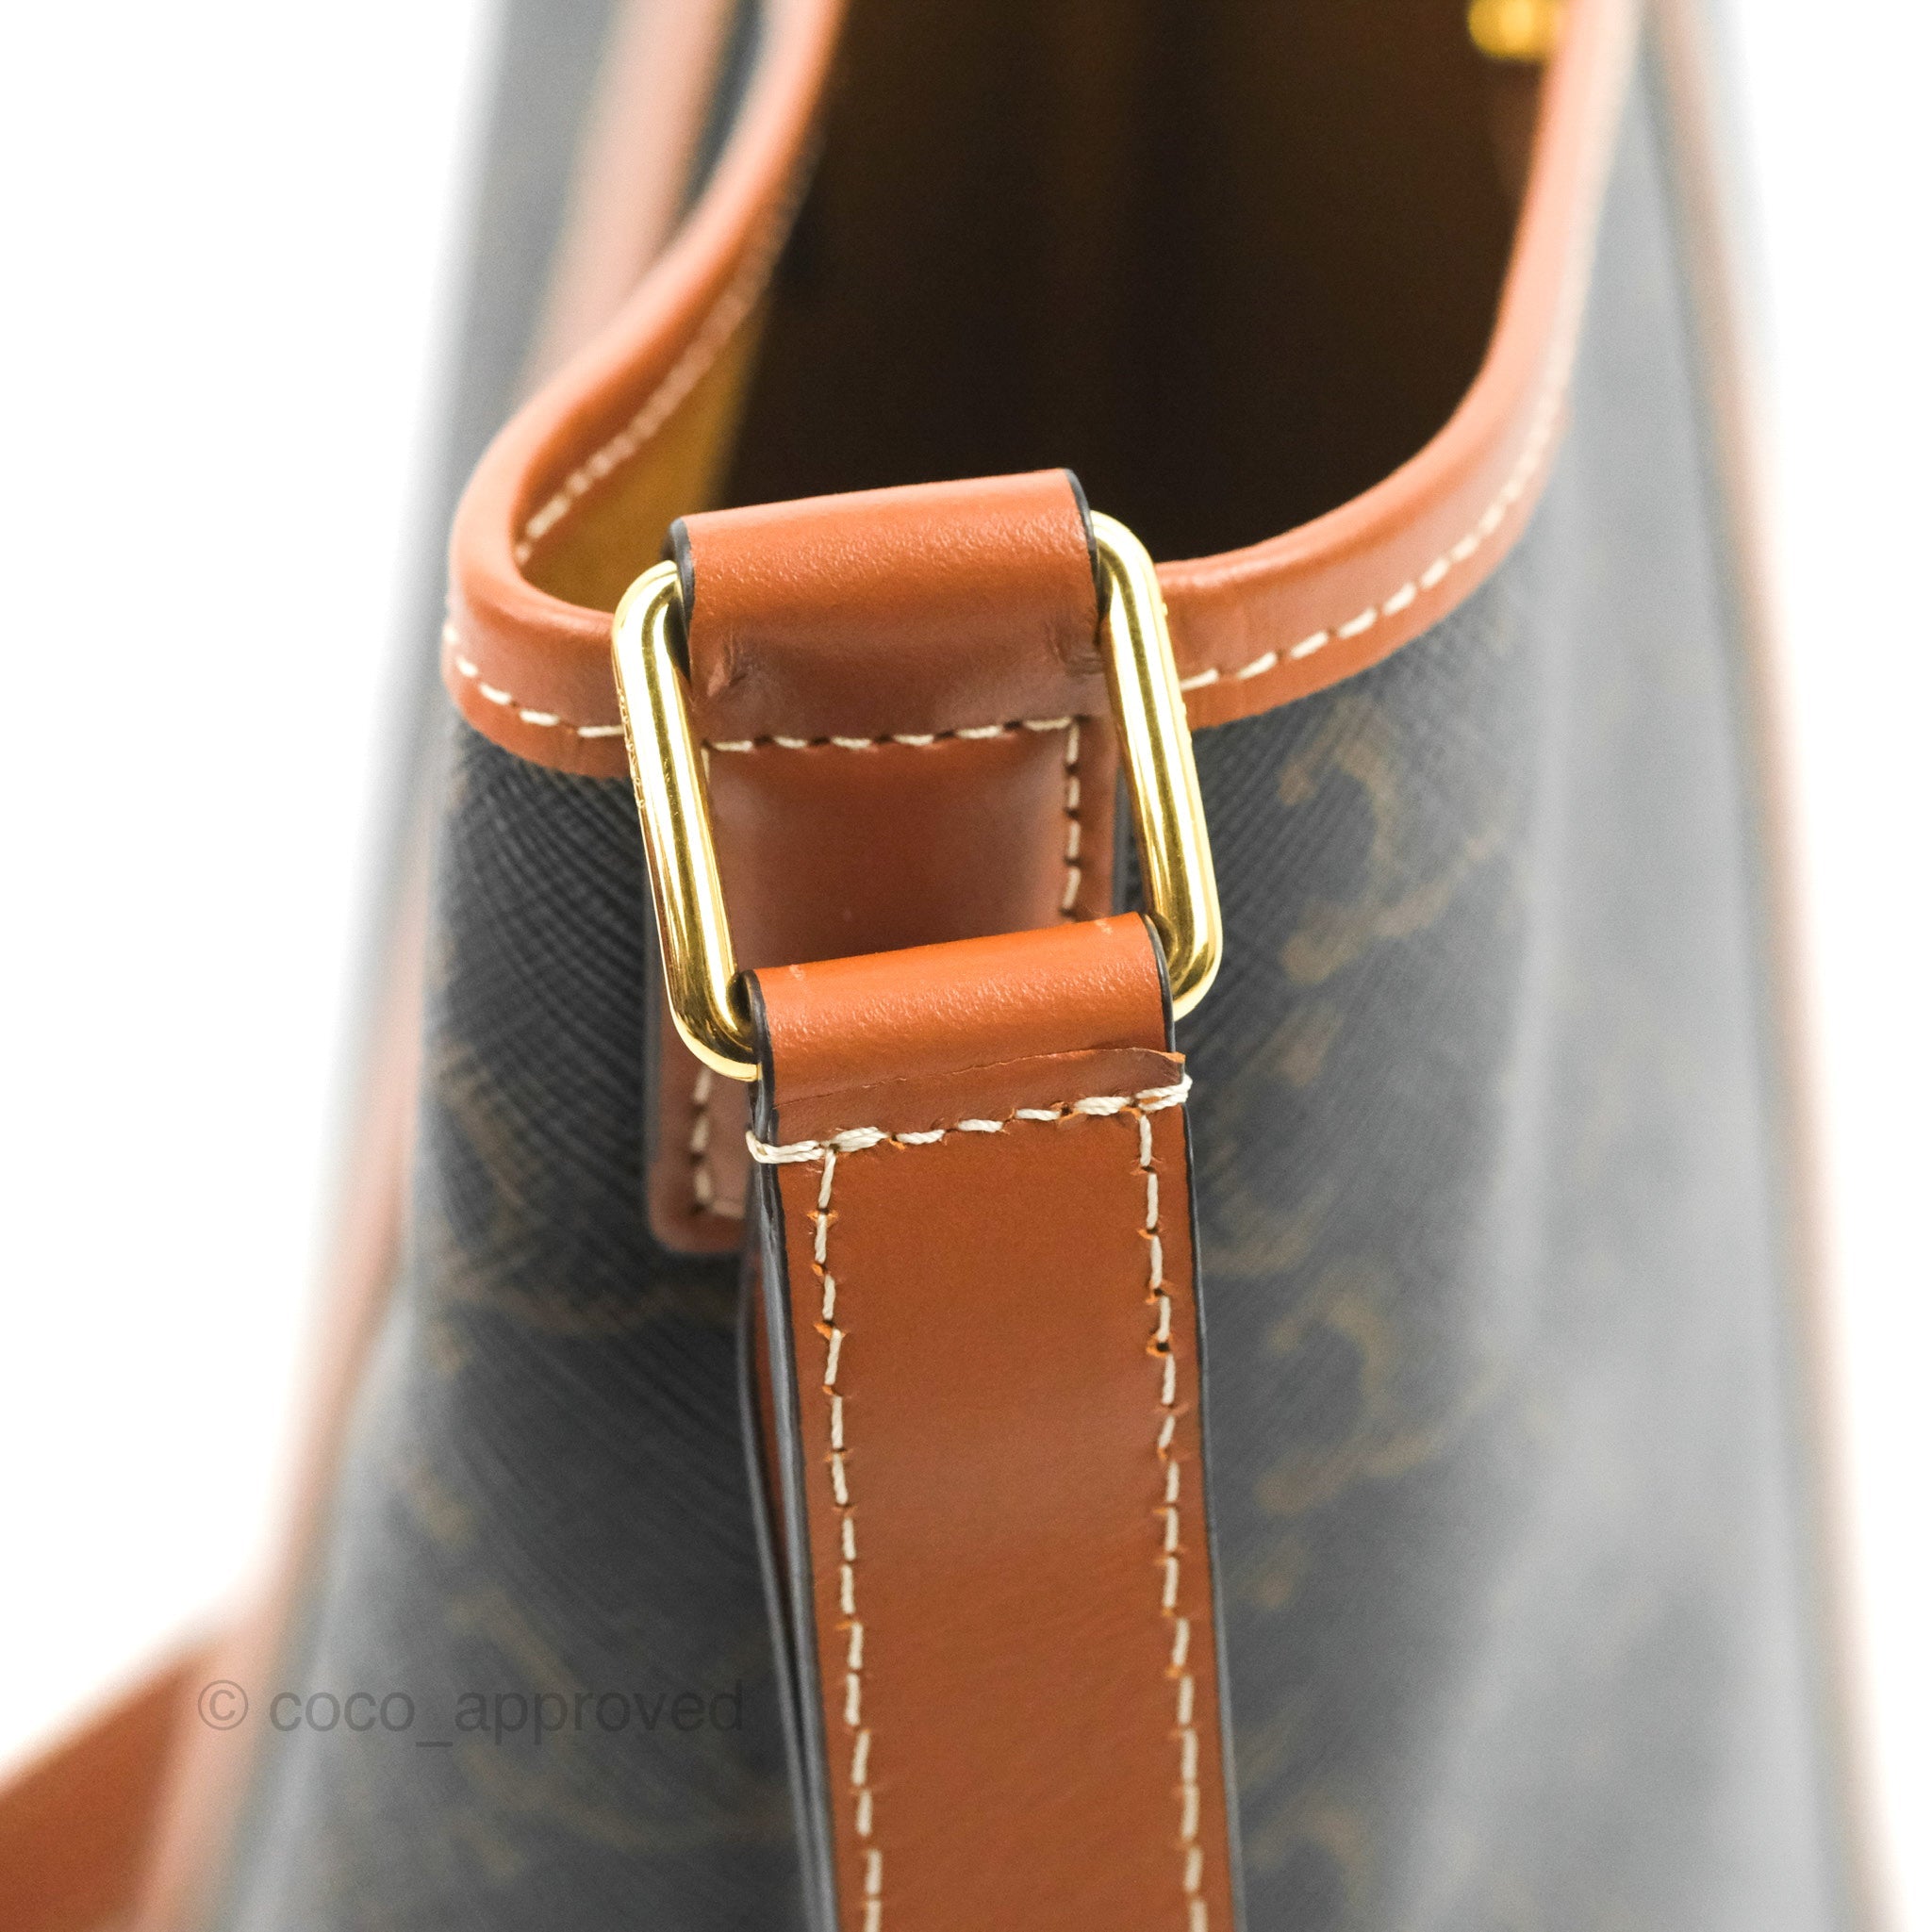 Small Bucket CUIR TRIOMPHE in Triomphe Canvas and calfskin